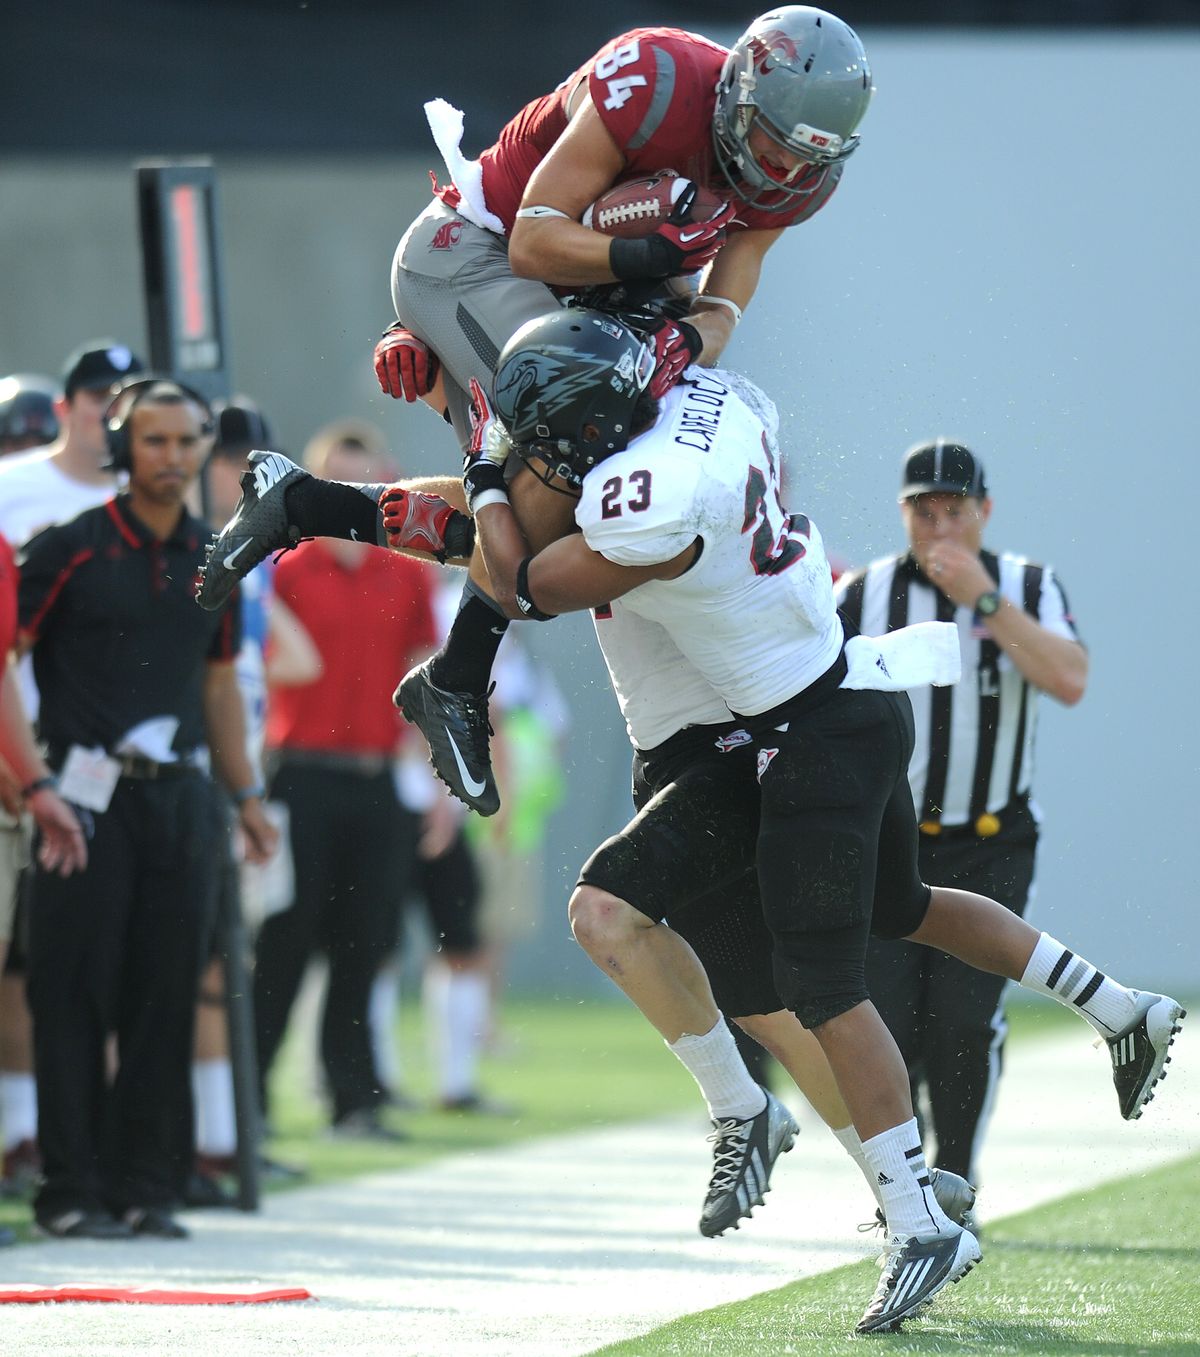 Washington State receiver River Cracraft is forced out of bounds by the Southern Utah defense during the first half on Saturday. (Tyler Tjomsland)